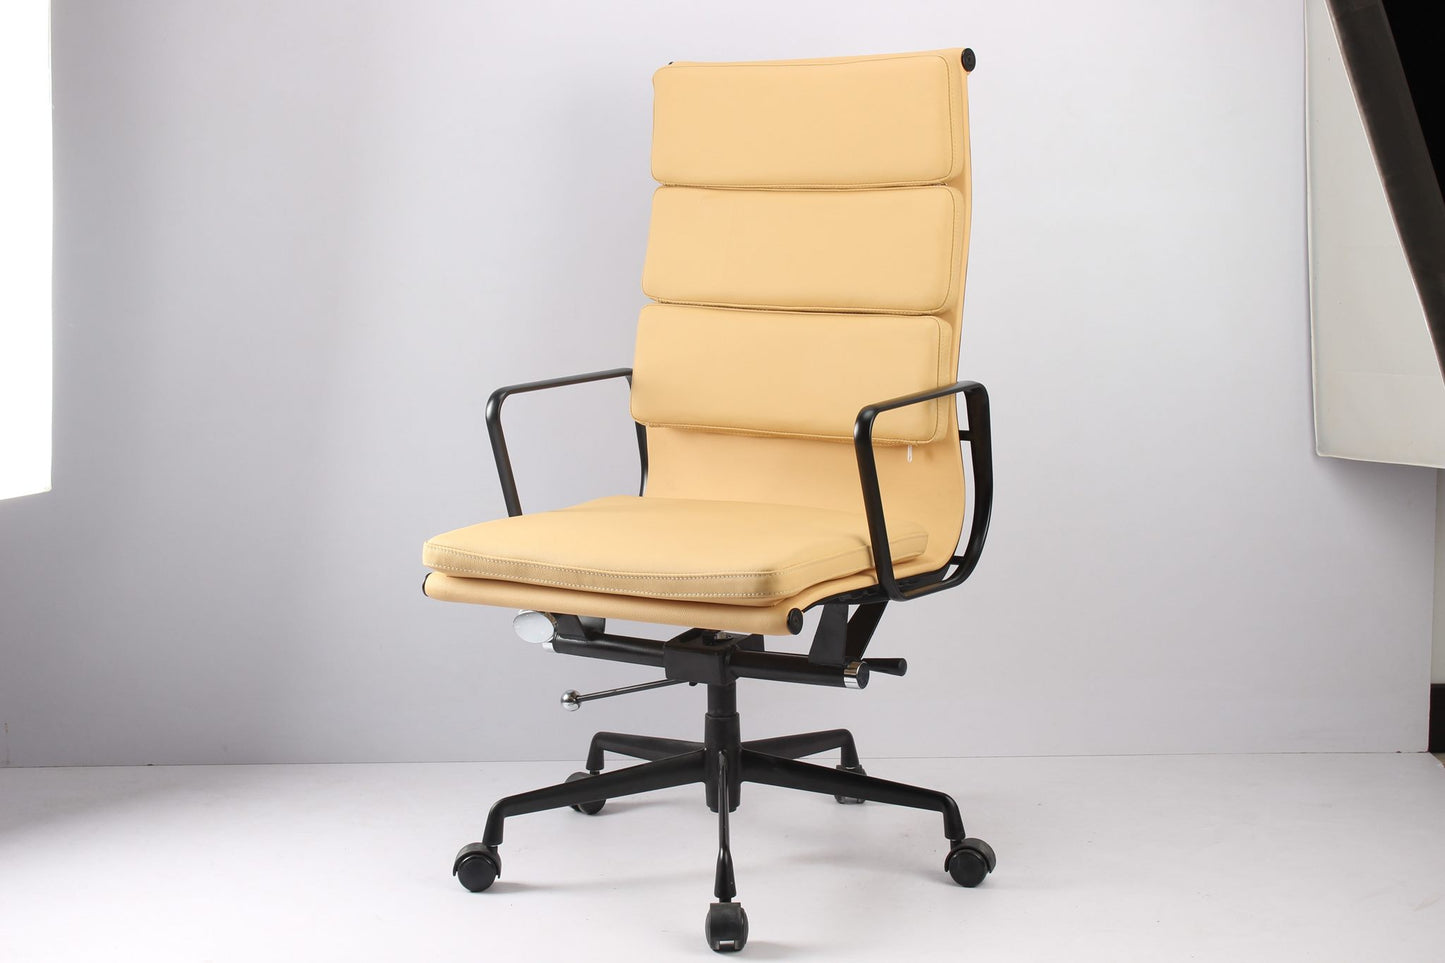 RP Genuine Leather Eames Soft Pad high back Office Chair, Beige color in stock